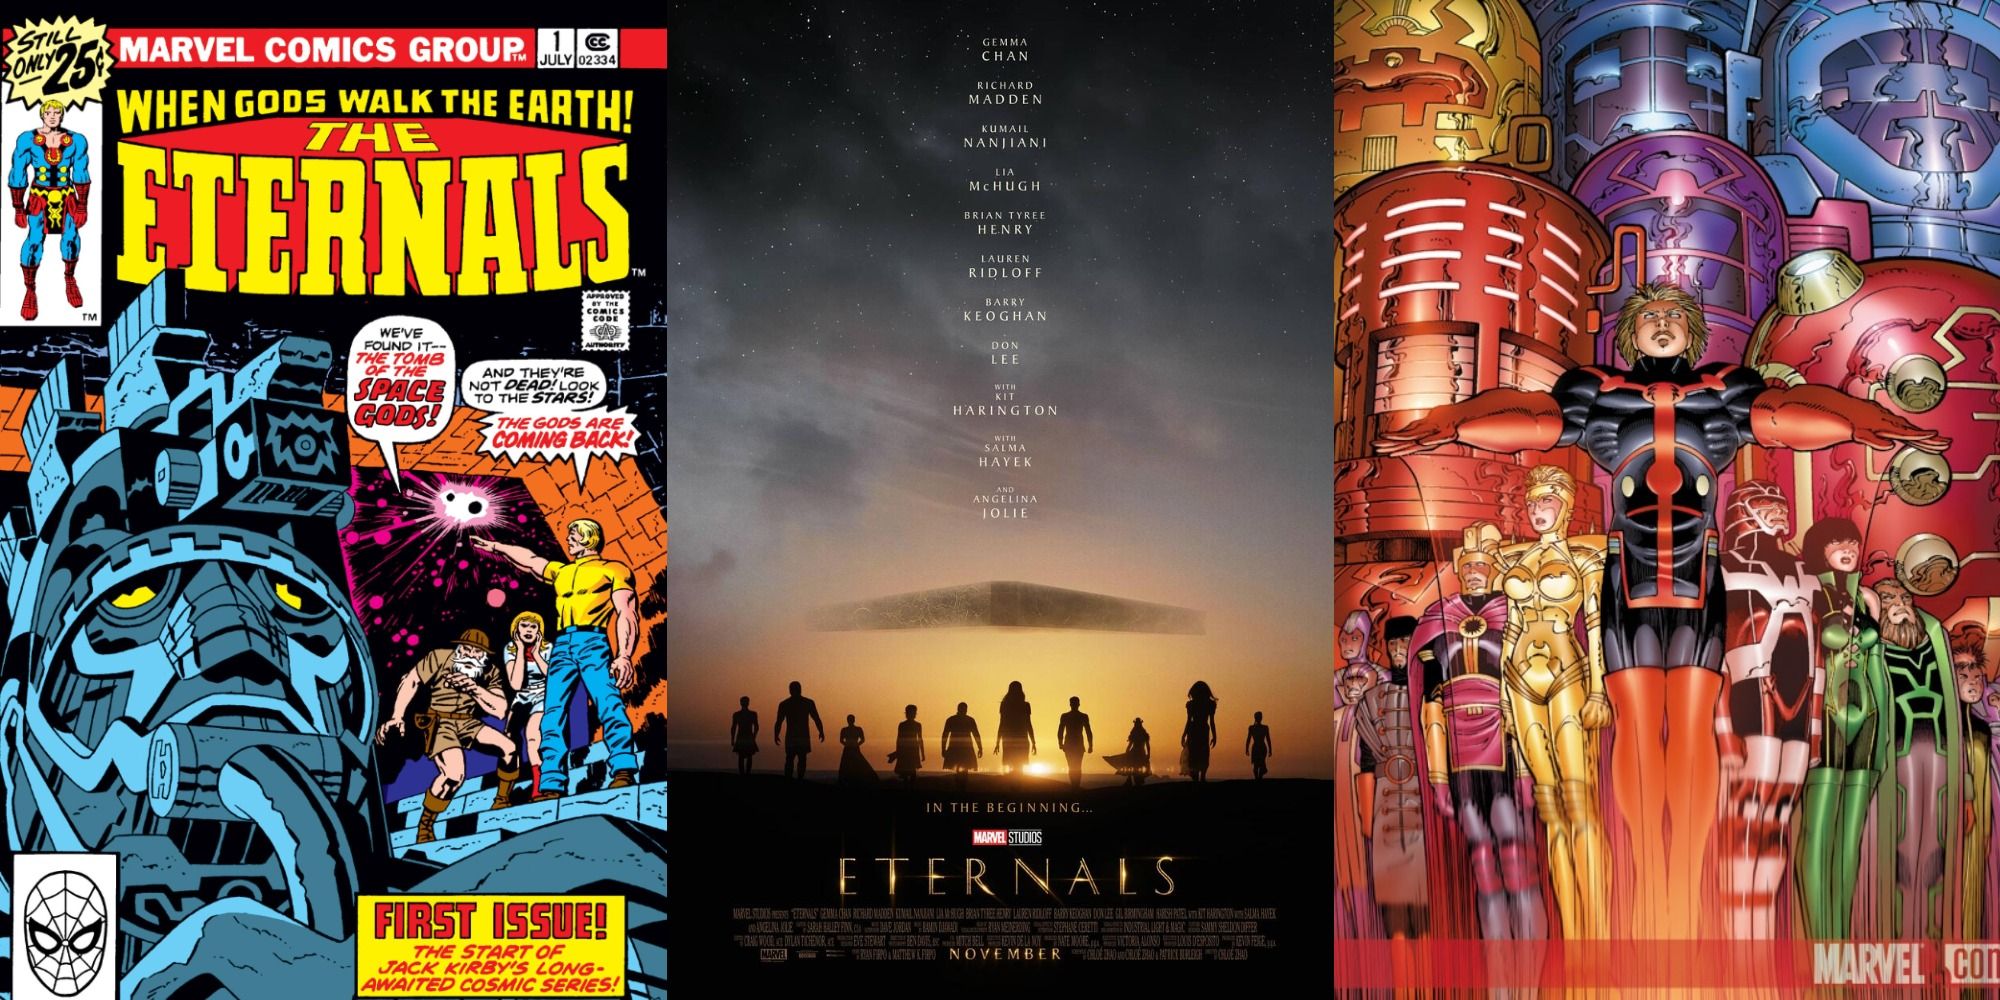 Eternal Split Feature Movie Poster and Jack Kirby and John Romita Jr Cover Art Difference Between Movie and Comics